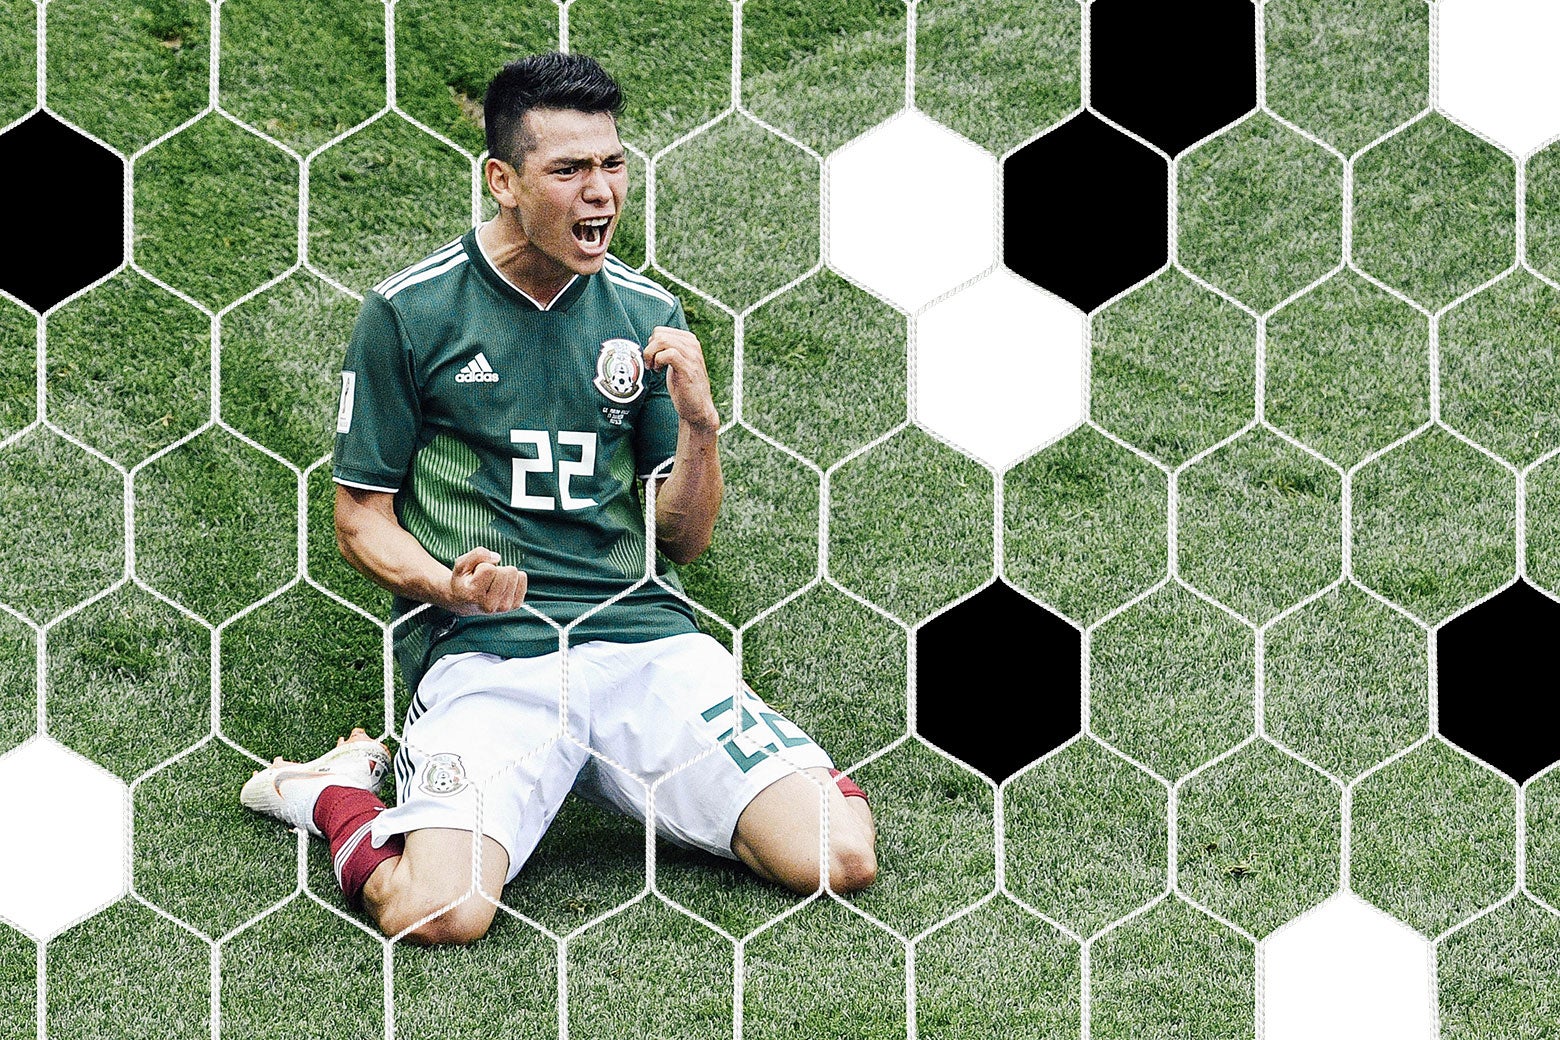 Hirving Lozano kneels on the pitch and pumps his fist in celebration.